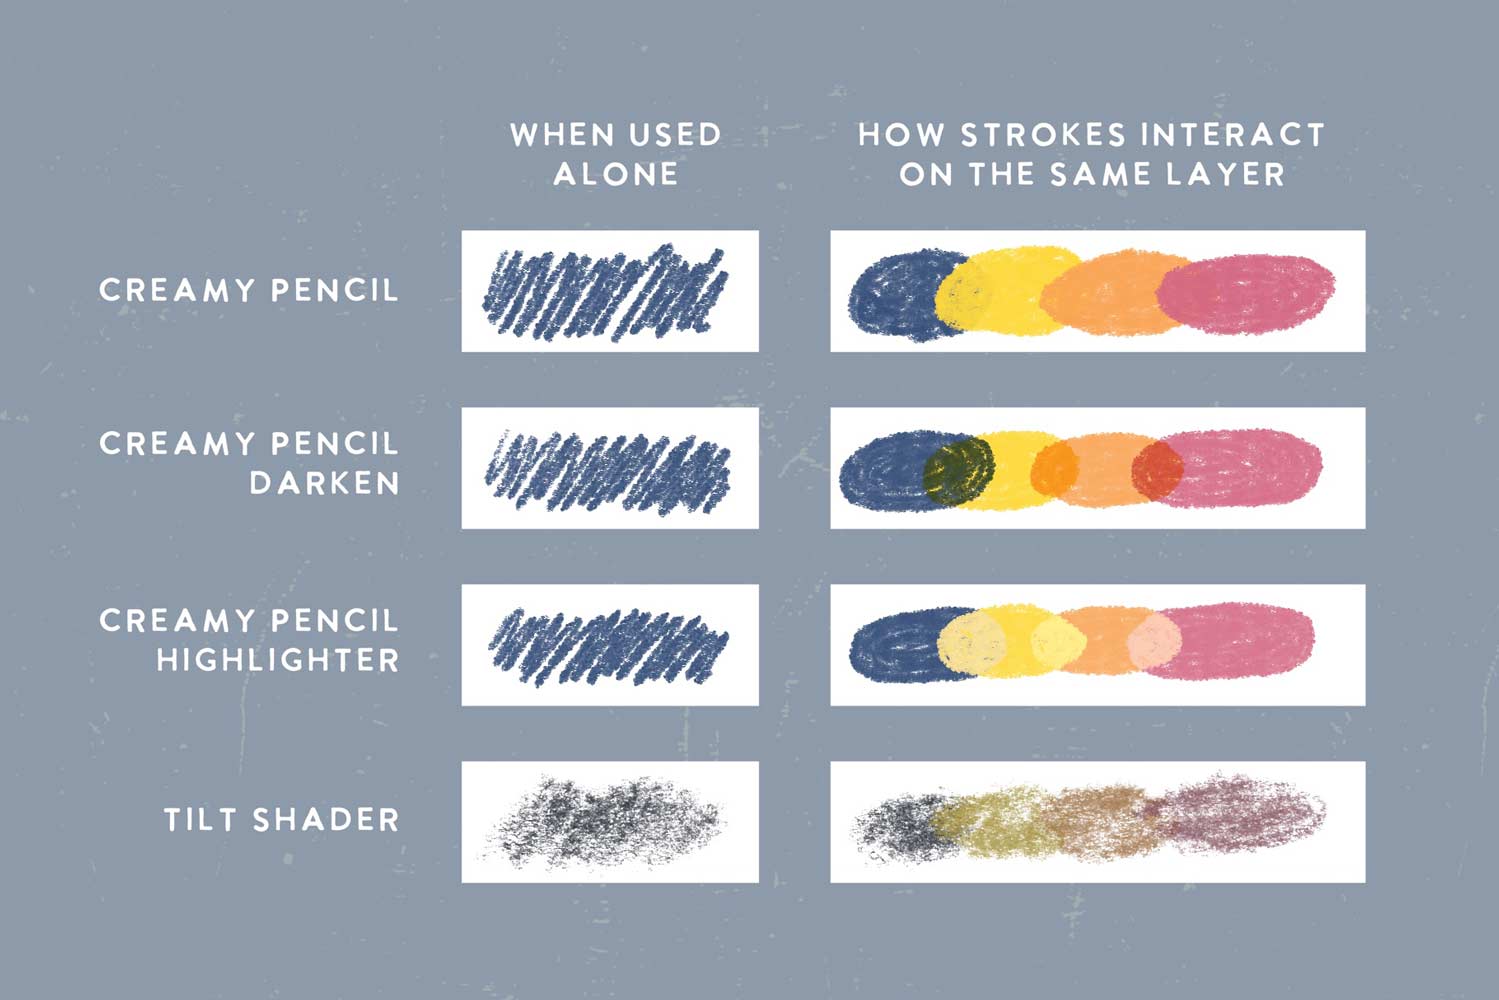 Illustration showing effects of various colored pencil strokes and interactions on a grey background labeled with techniques like "Procreate Realistic Colored Pencils Brush Set 4-Pack alone," "Procreate Realistic Colored Pencils Brush Set 4-Pack darken," and others by Esther Nariyoshi Studio.